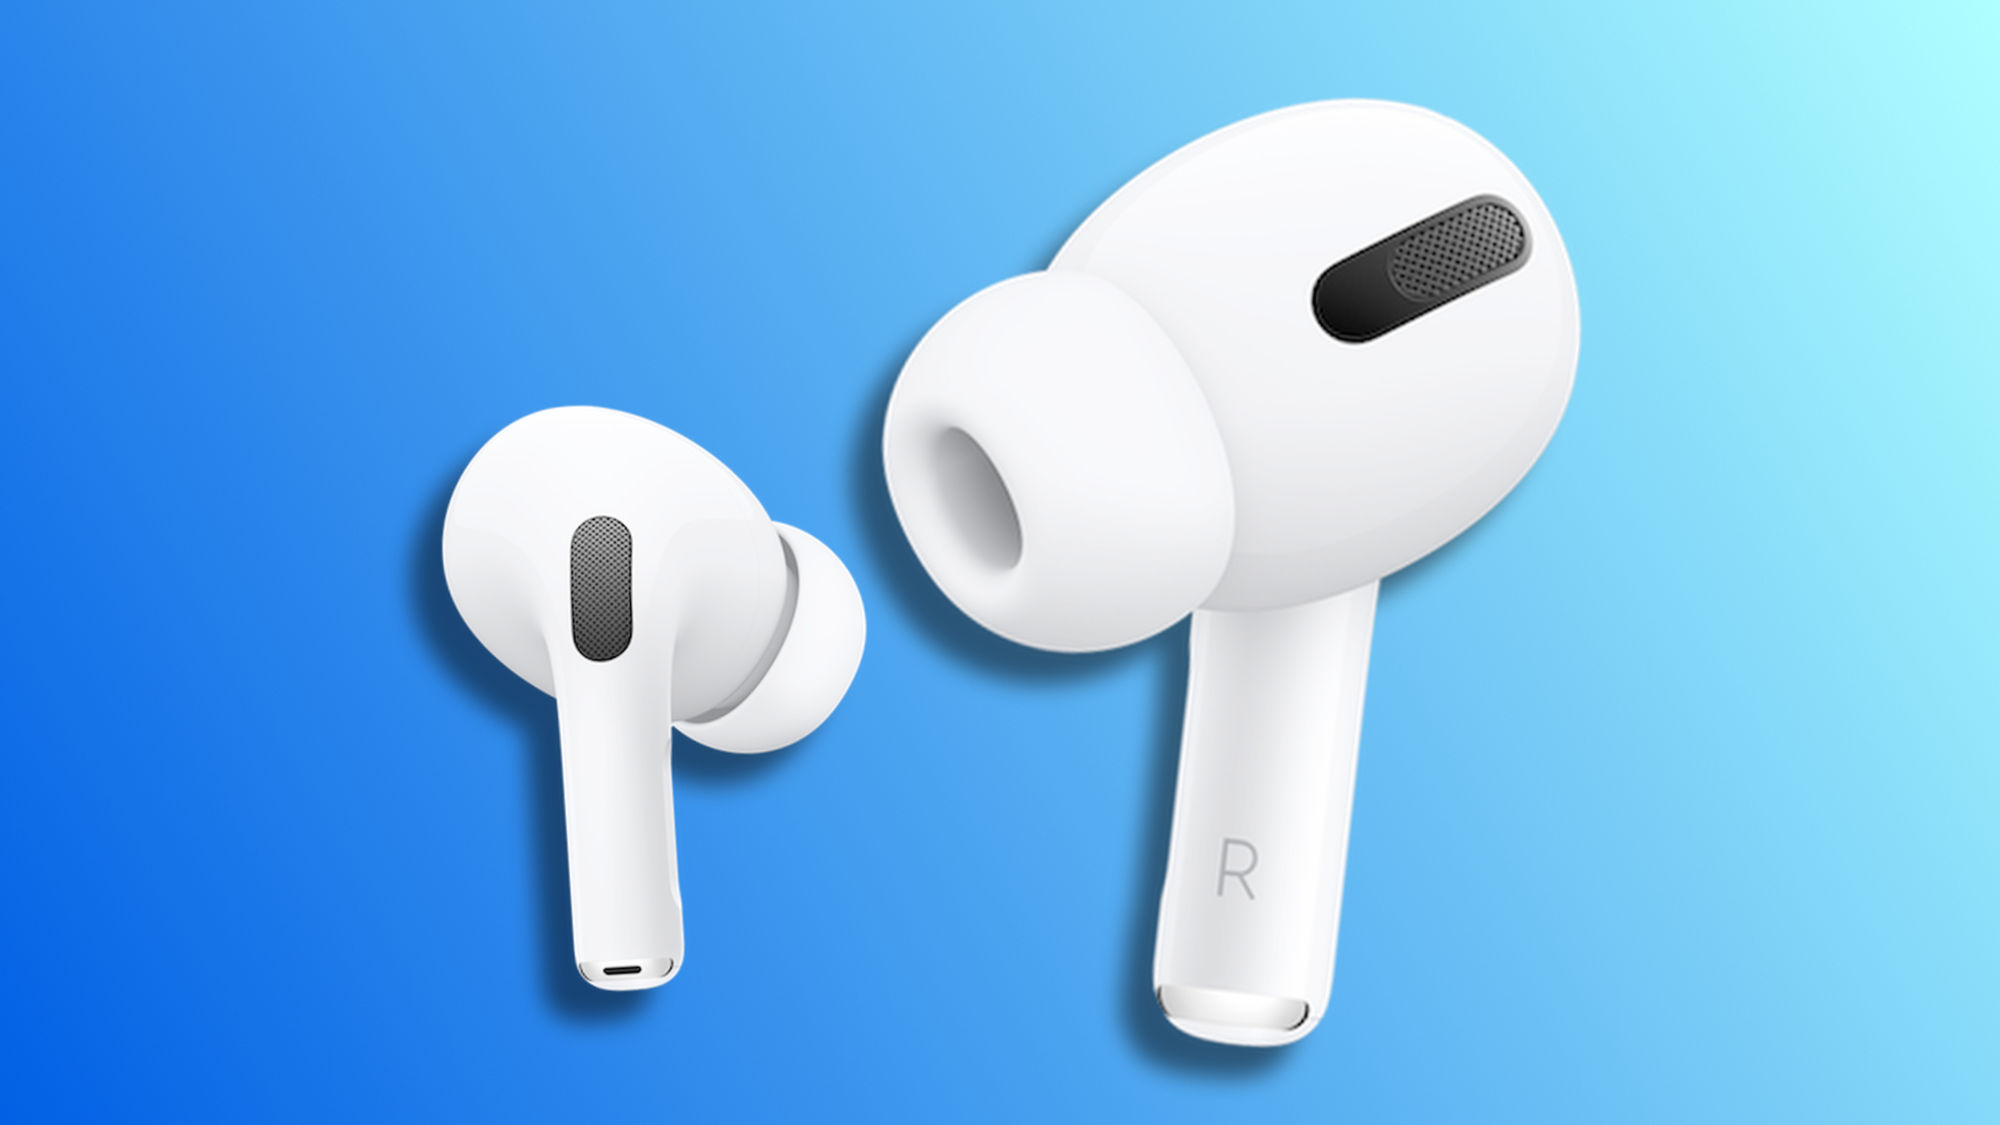 What to do if one AirPod sounds louder than the other